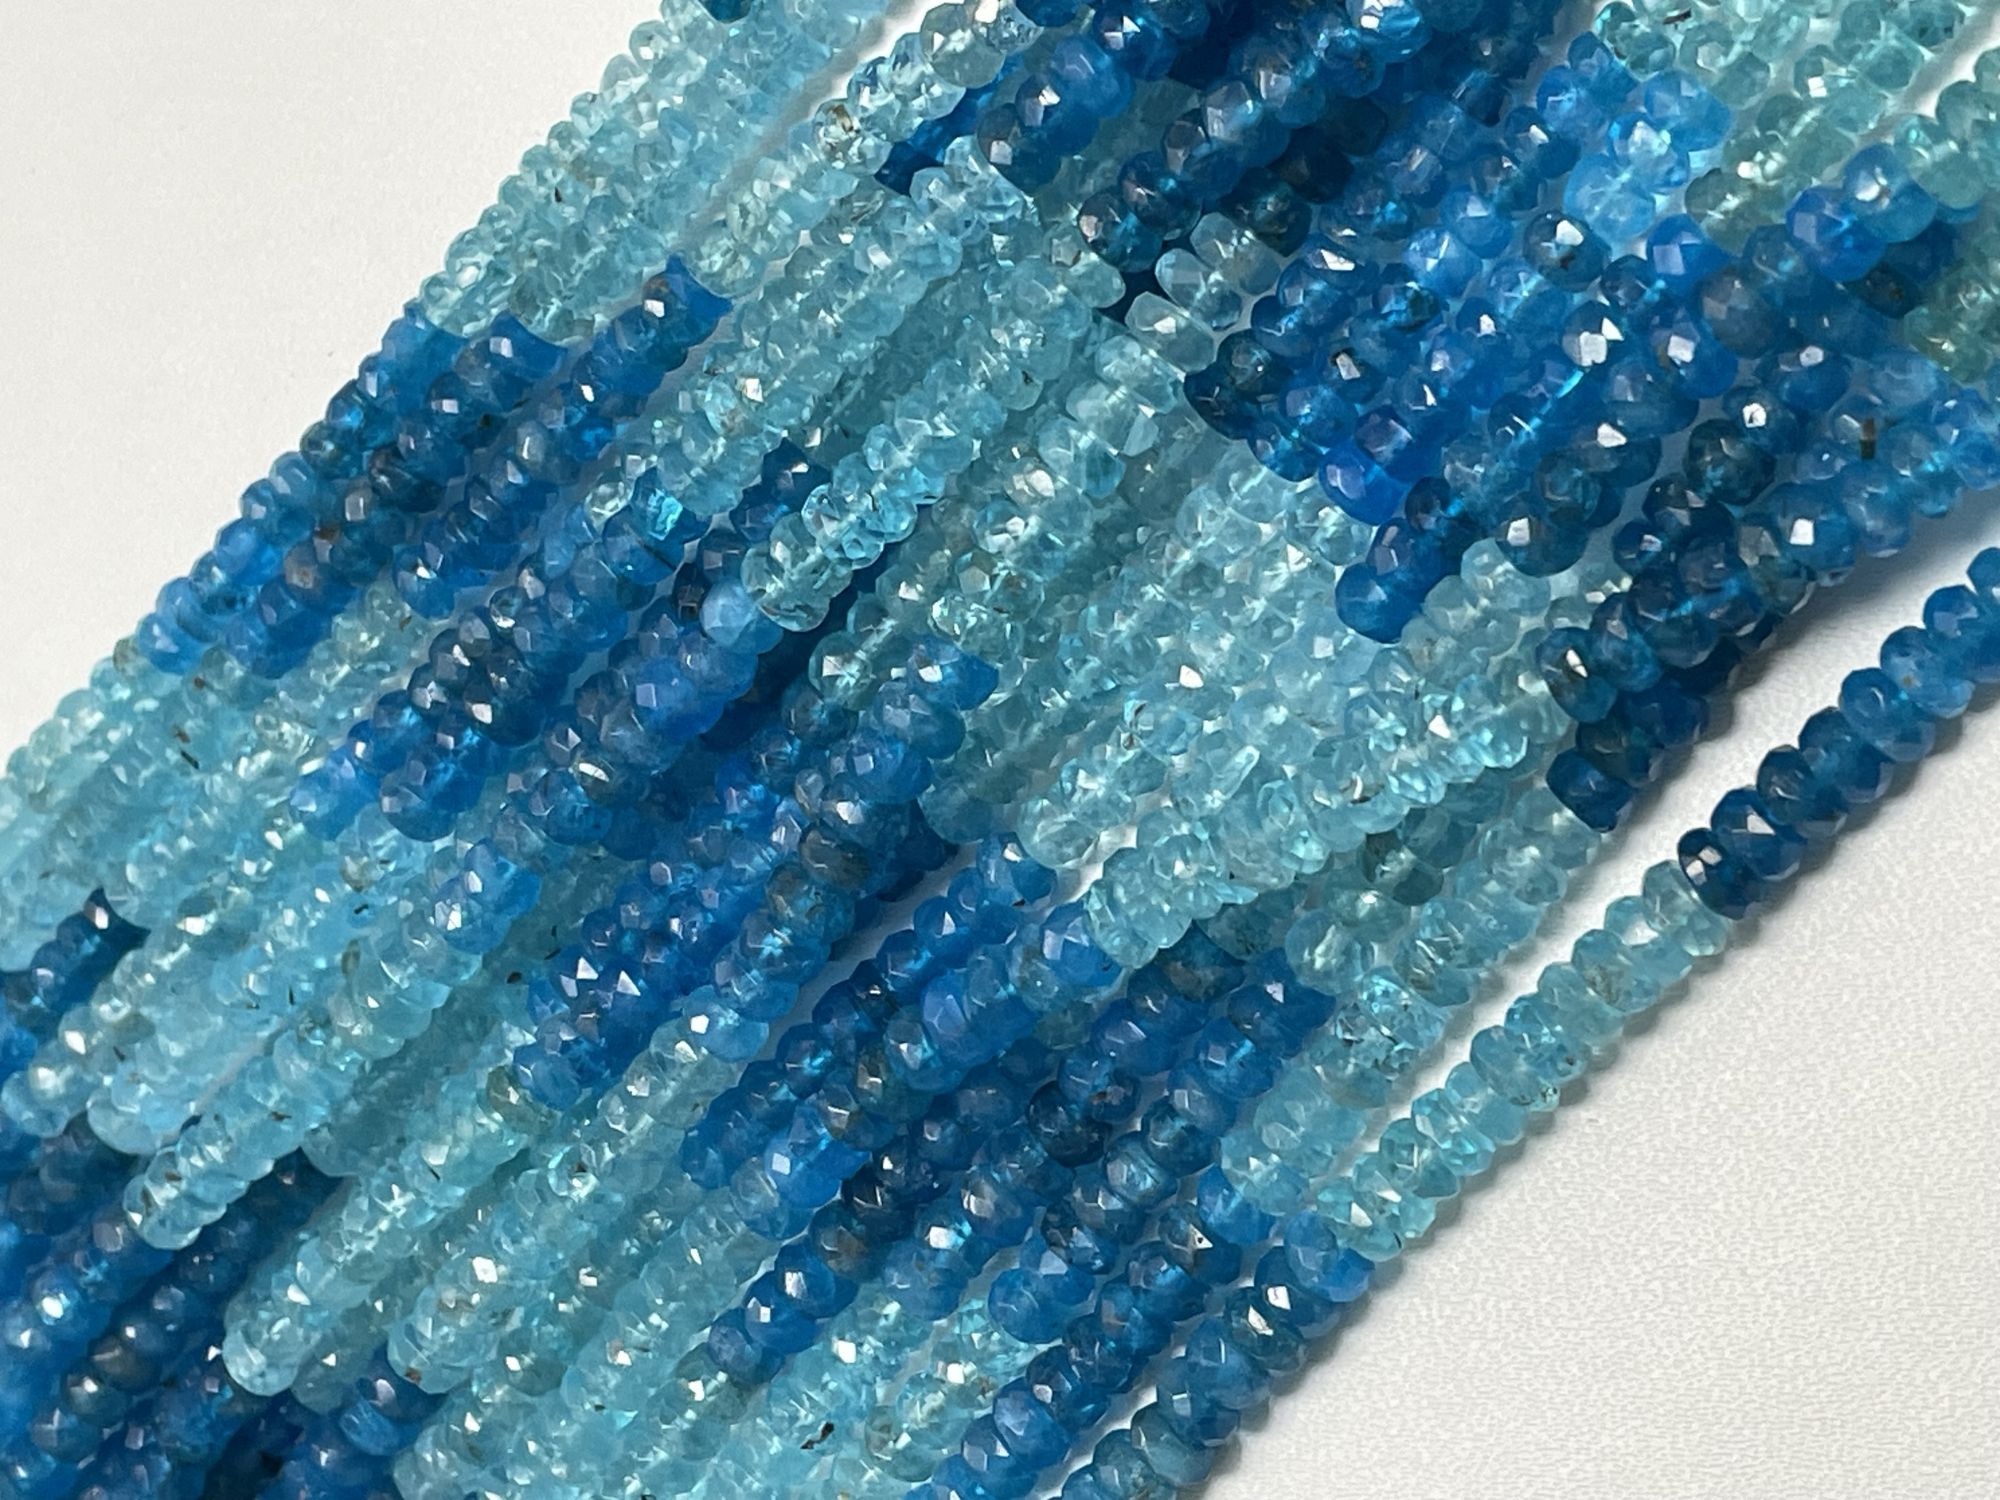 Shaded Apatite Rondelle Faceted